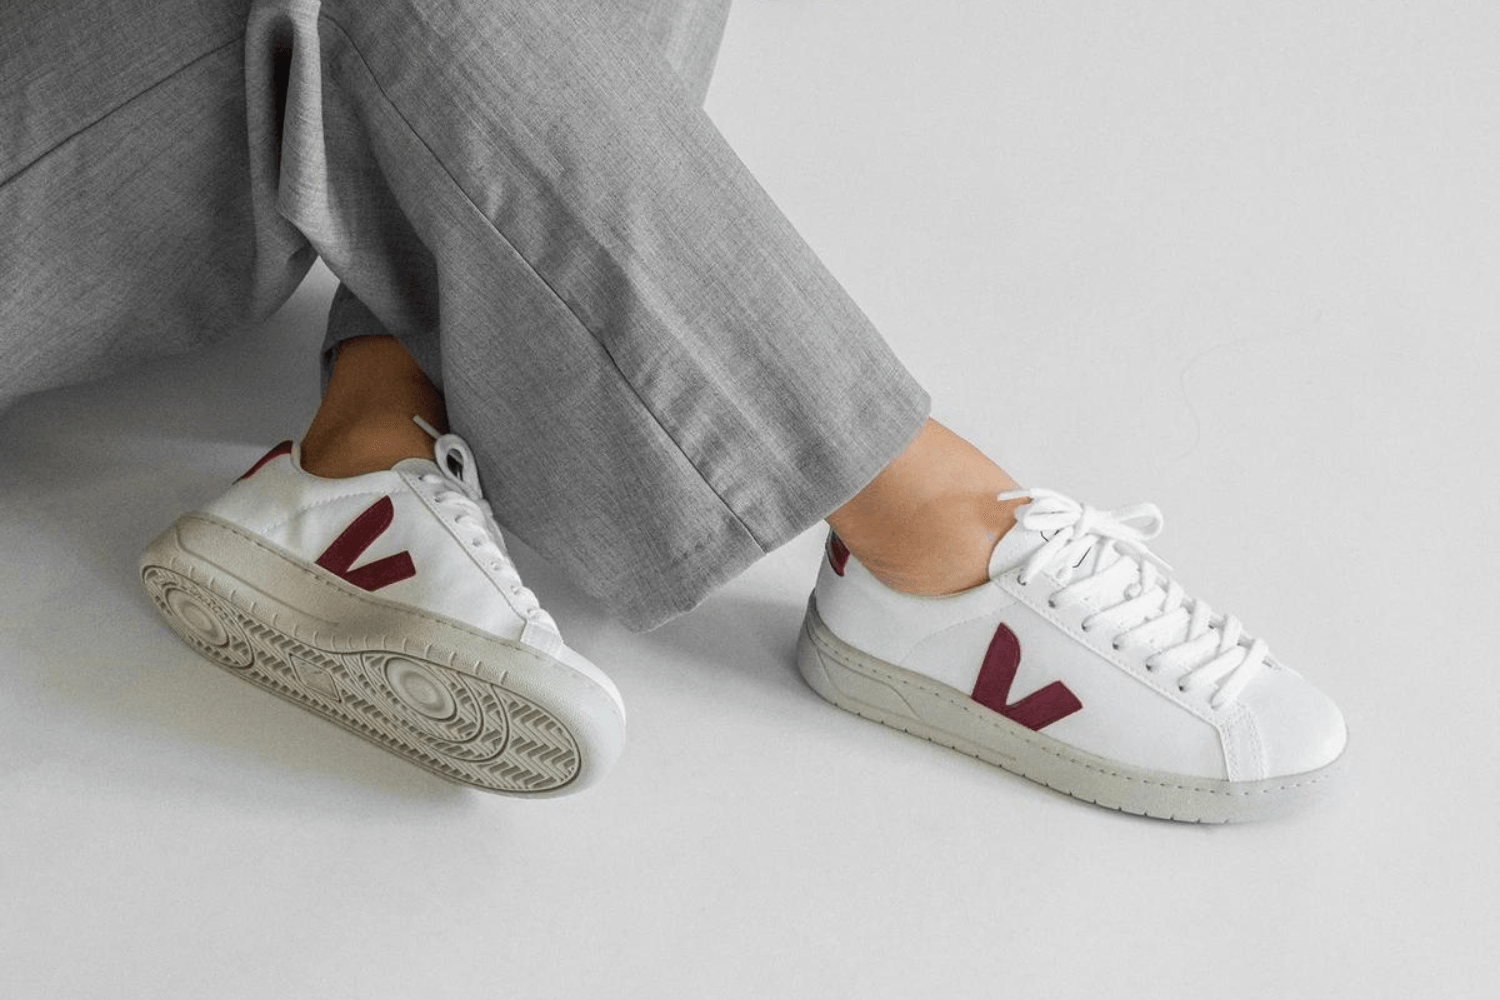 The story behind sustainable French brand VEJA